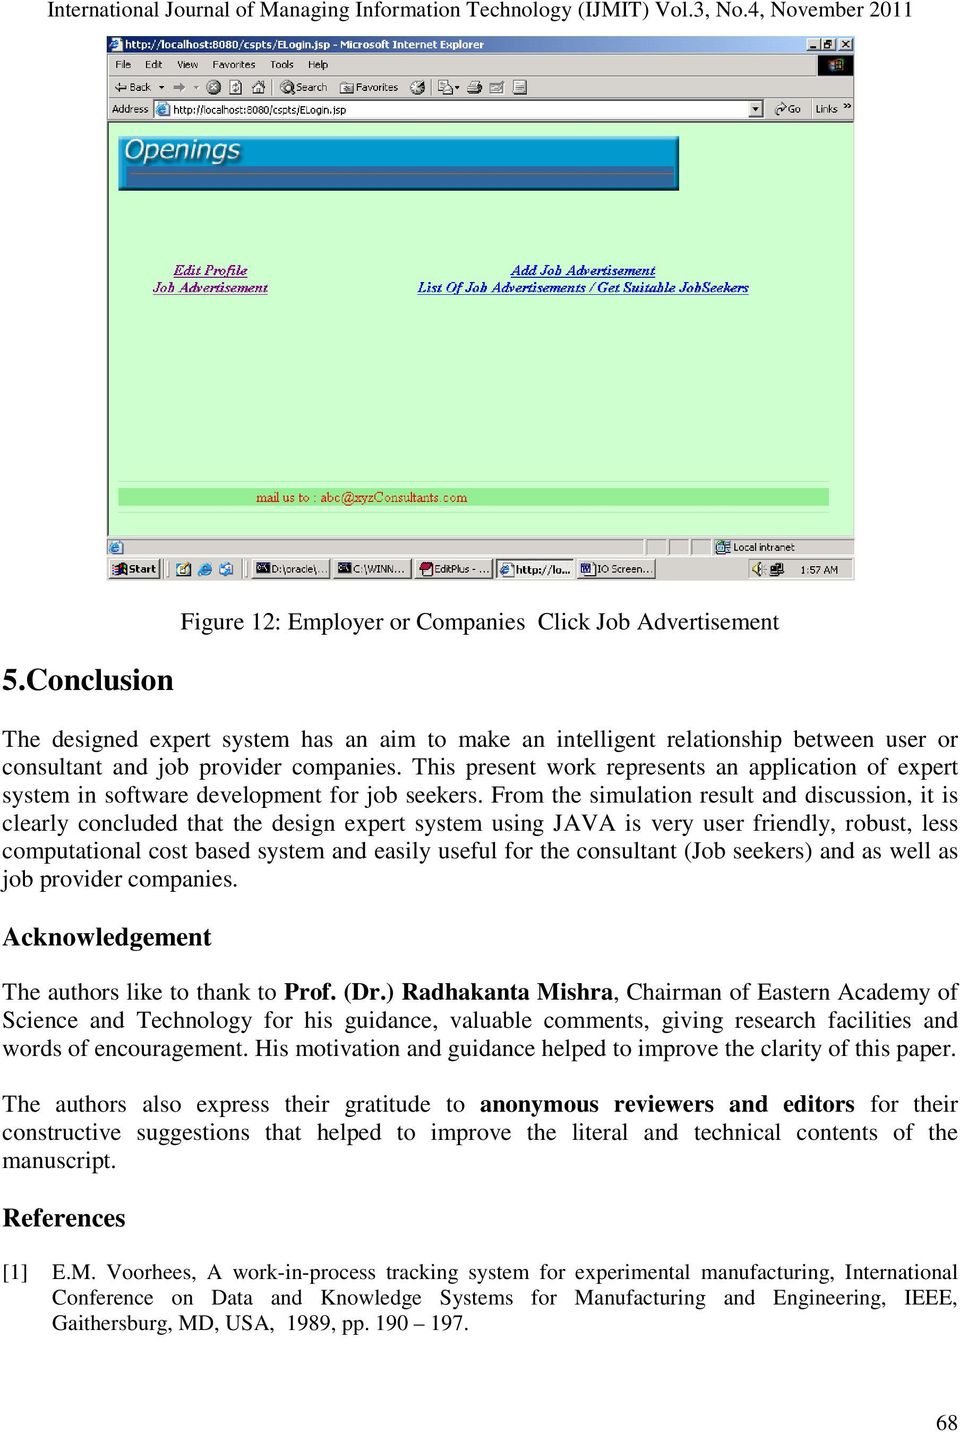 From the simulation result and discussion, it is clearly concluded that the design expert system using JAVA is very user friendly, robust, less computational cost based system and easily useful for